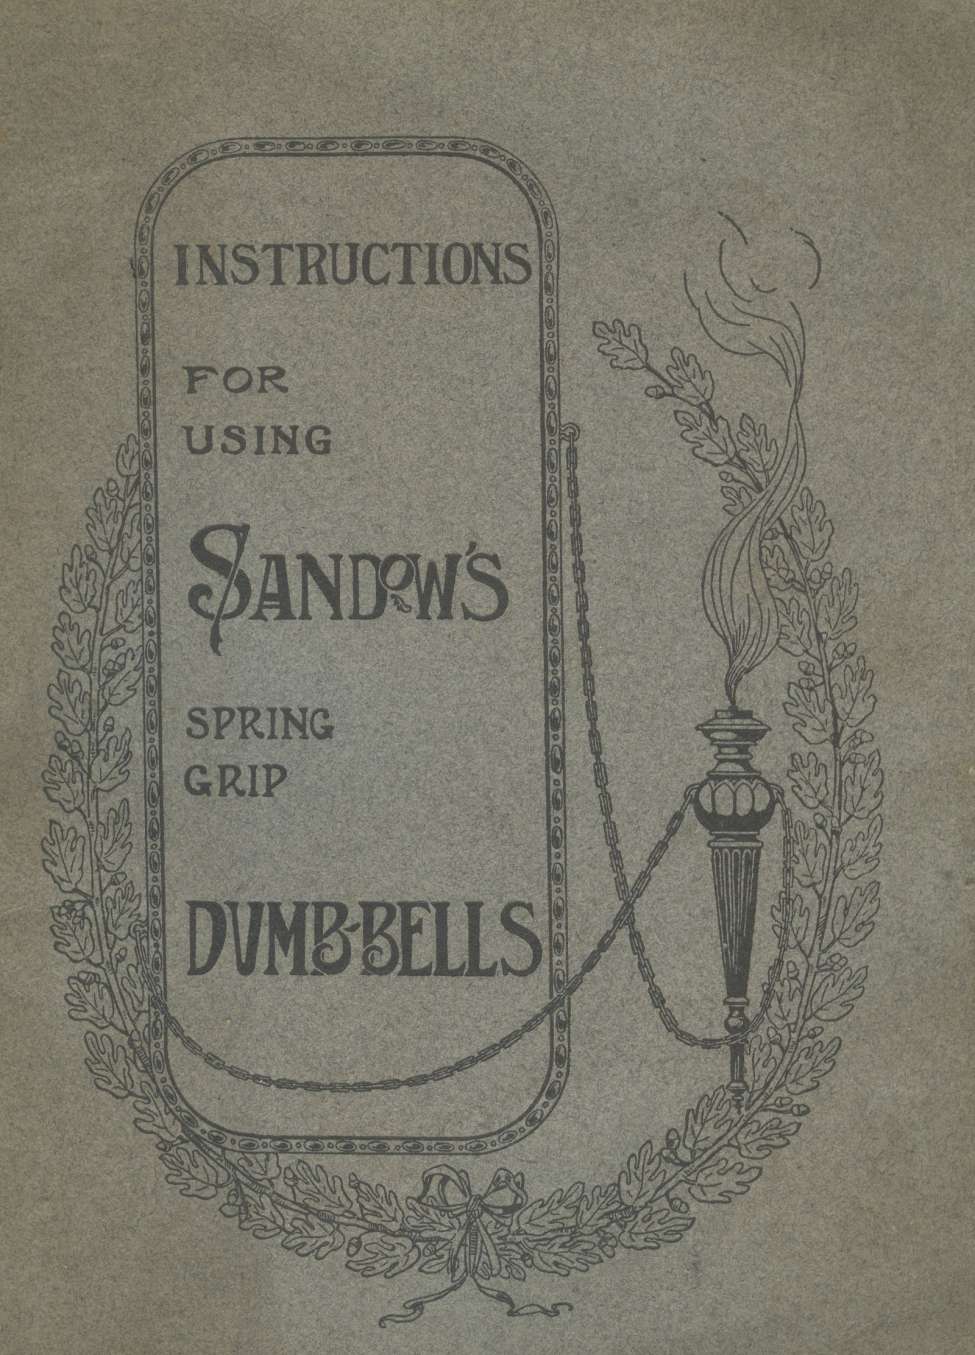 Comic Book Cover For Sandow's Spring Grip Dumb-Bells - Instruction Book